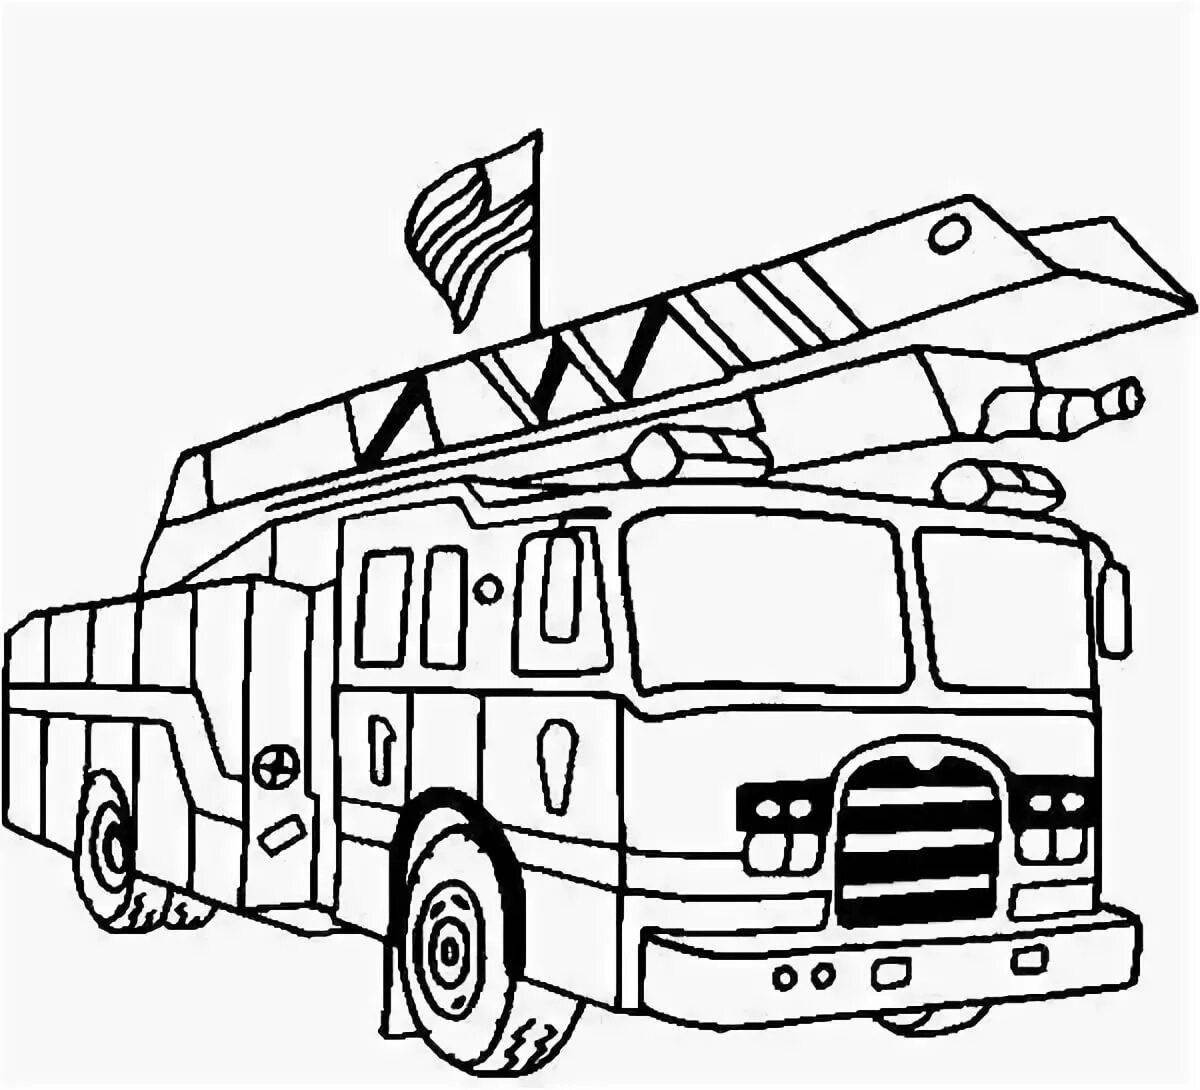 Glowing fire truck coloring page